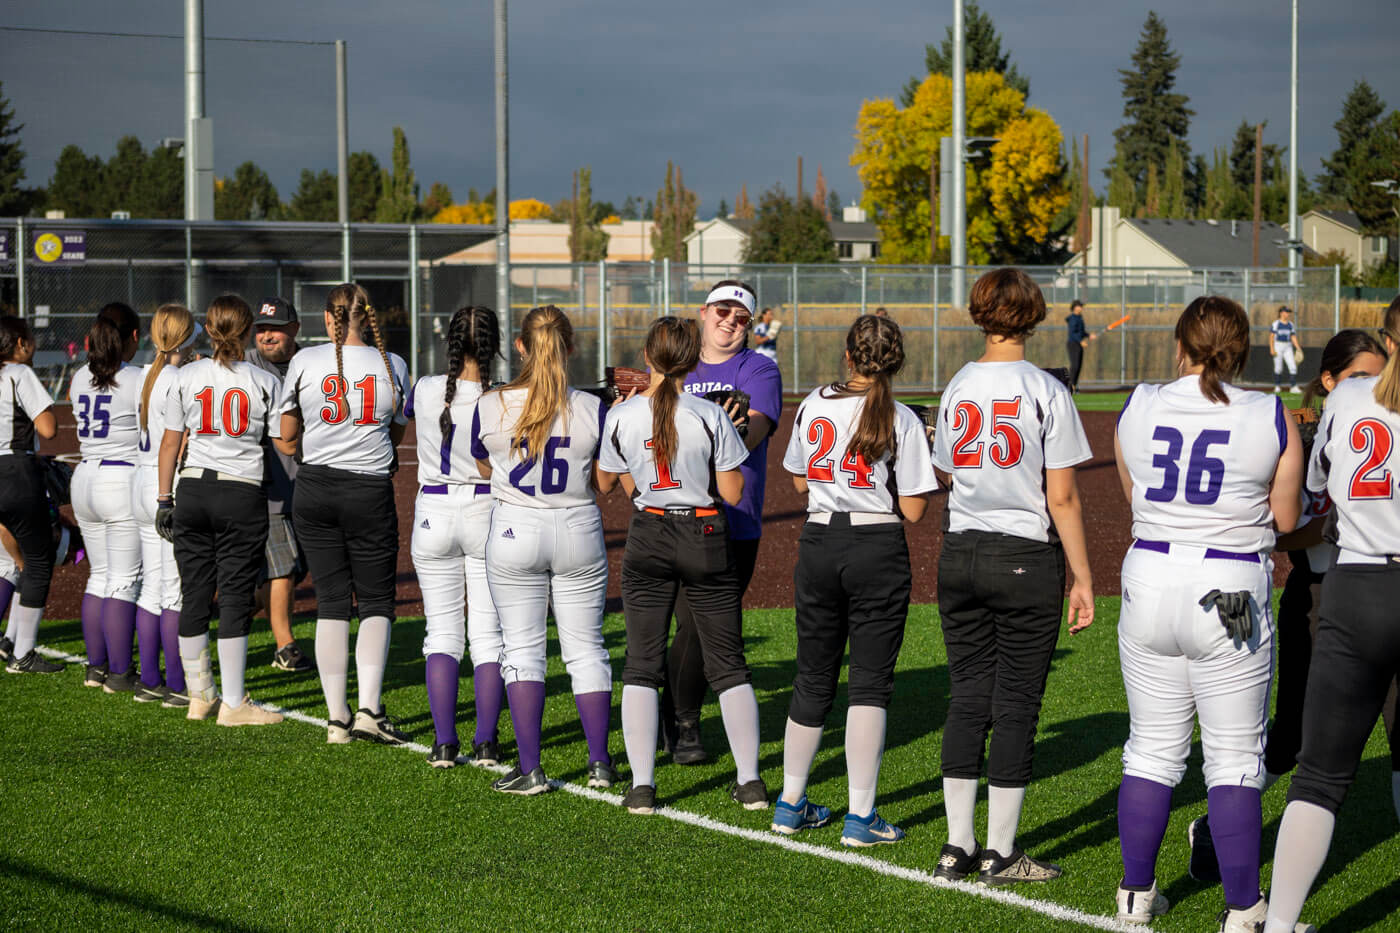 Softball players lined up